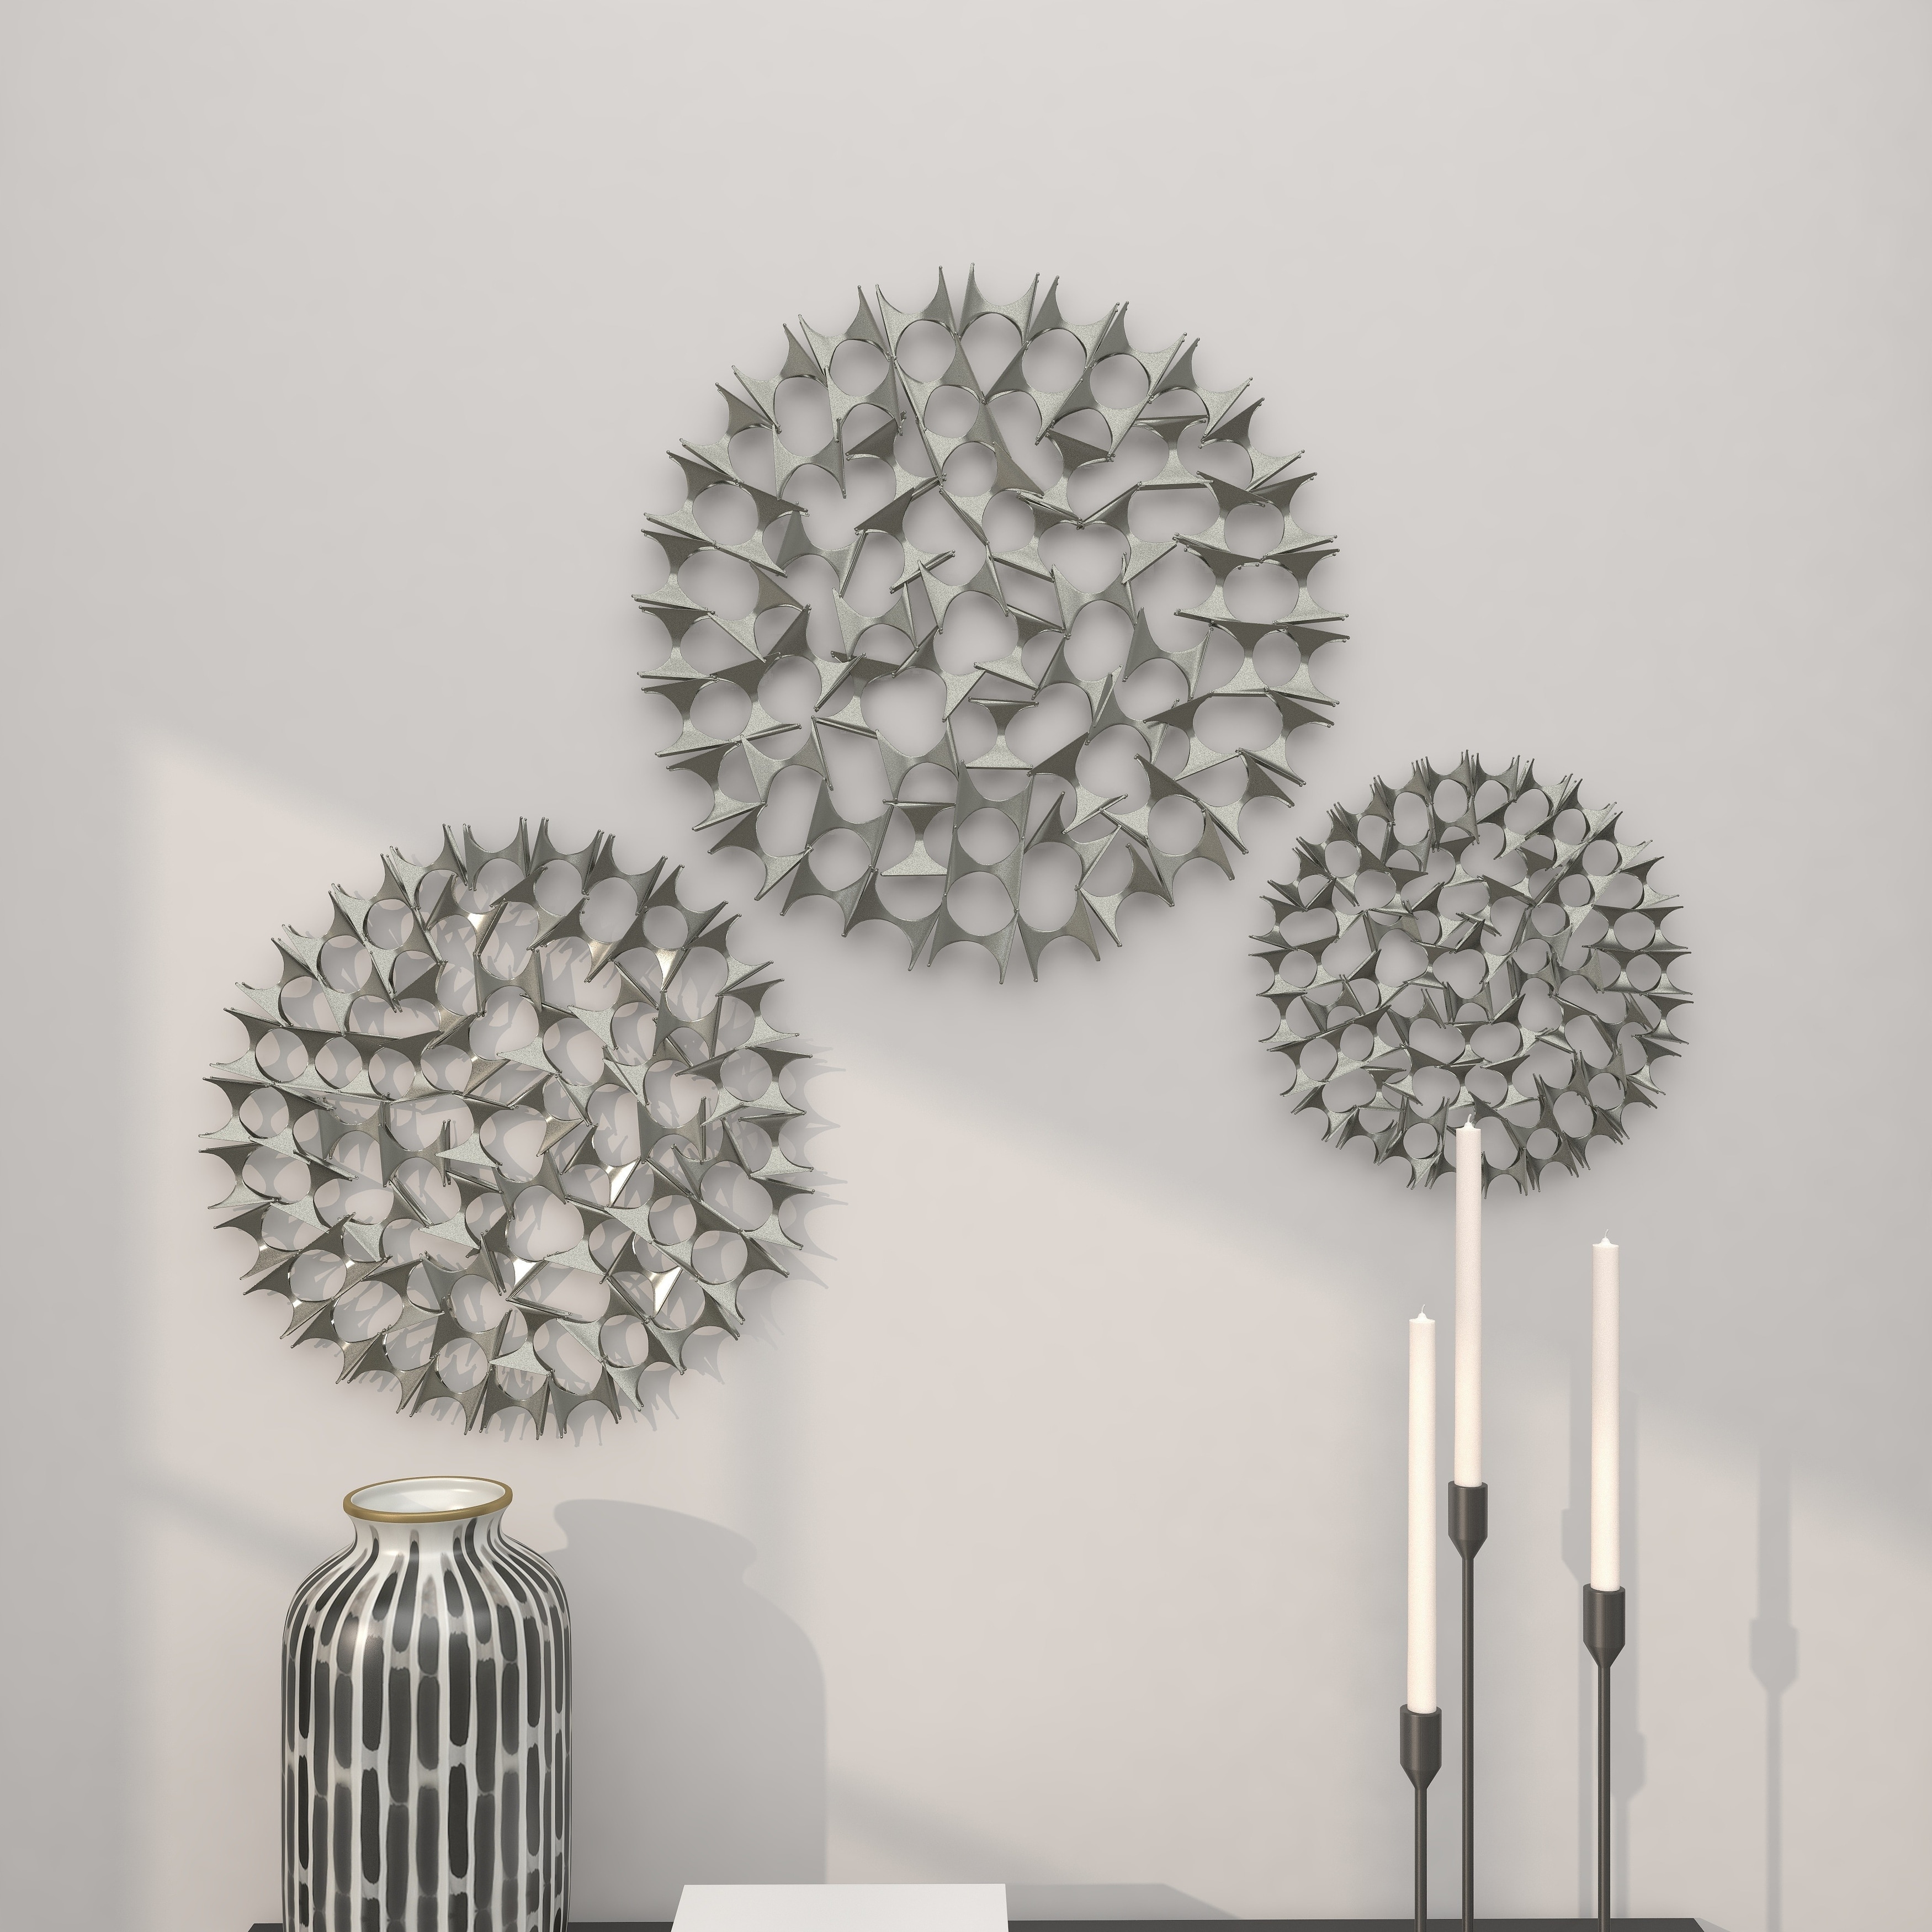 Metal Starburst Wall Decor with Cutout Design Gold or Silver Set of  Bed Bath  Beyond 13041164